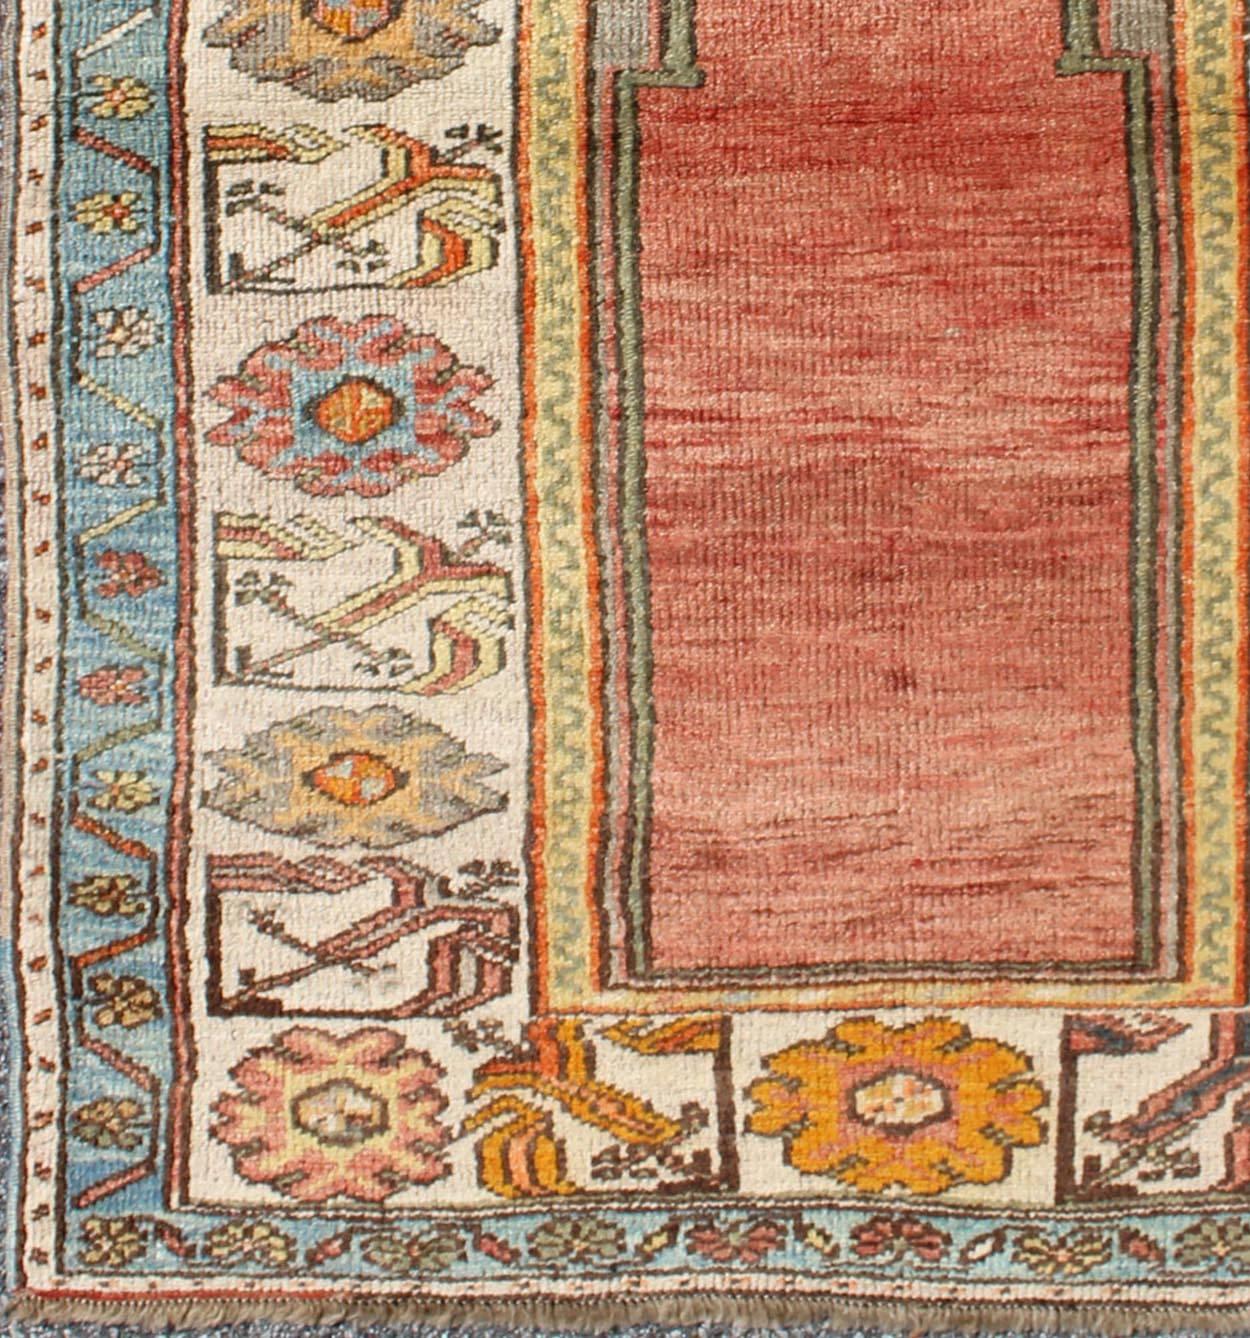 Antique Turkish Prayer Rug in Turquoise, Salmon, Orange, Blue and Ivory.
This wonderful, small prayer rug displays a multi-tiered, wide border and a prayer design. The striking colors of 
 turquoise, Salmon, Orange give this very unique design much